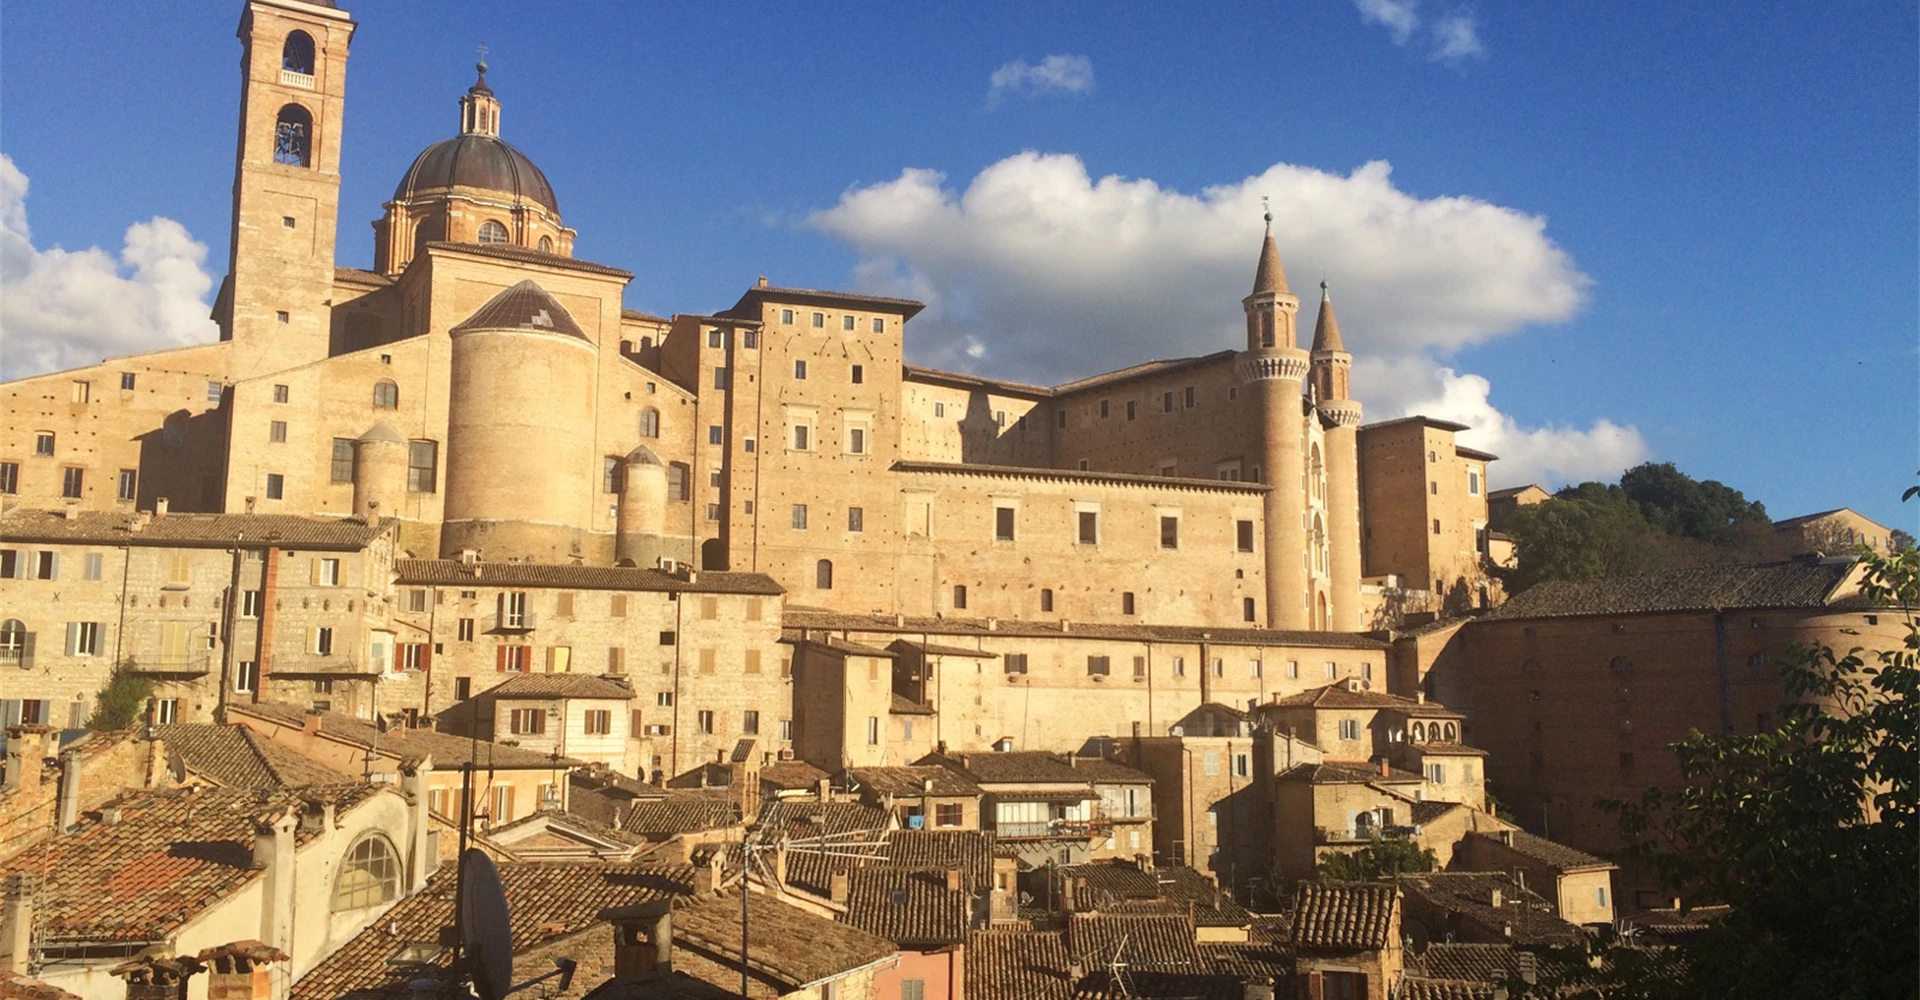 Urbino by Bicycle – Guided Tour